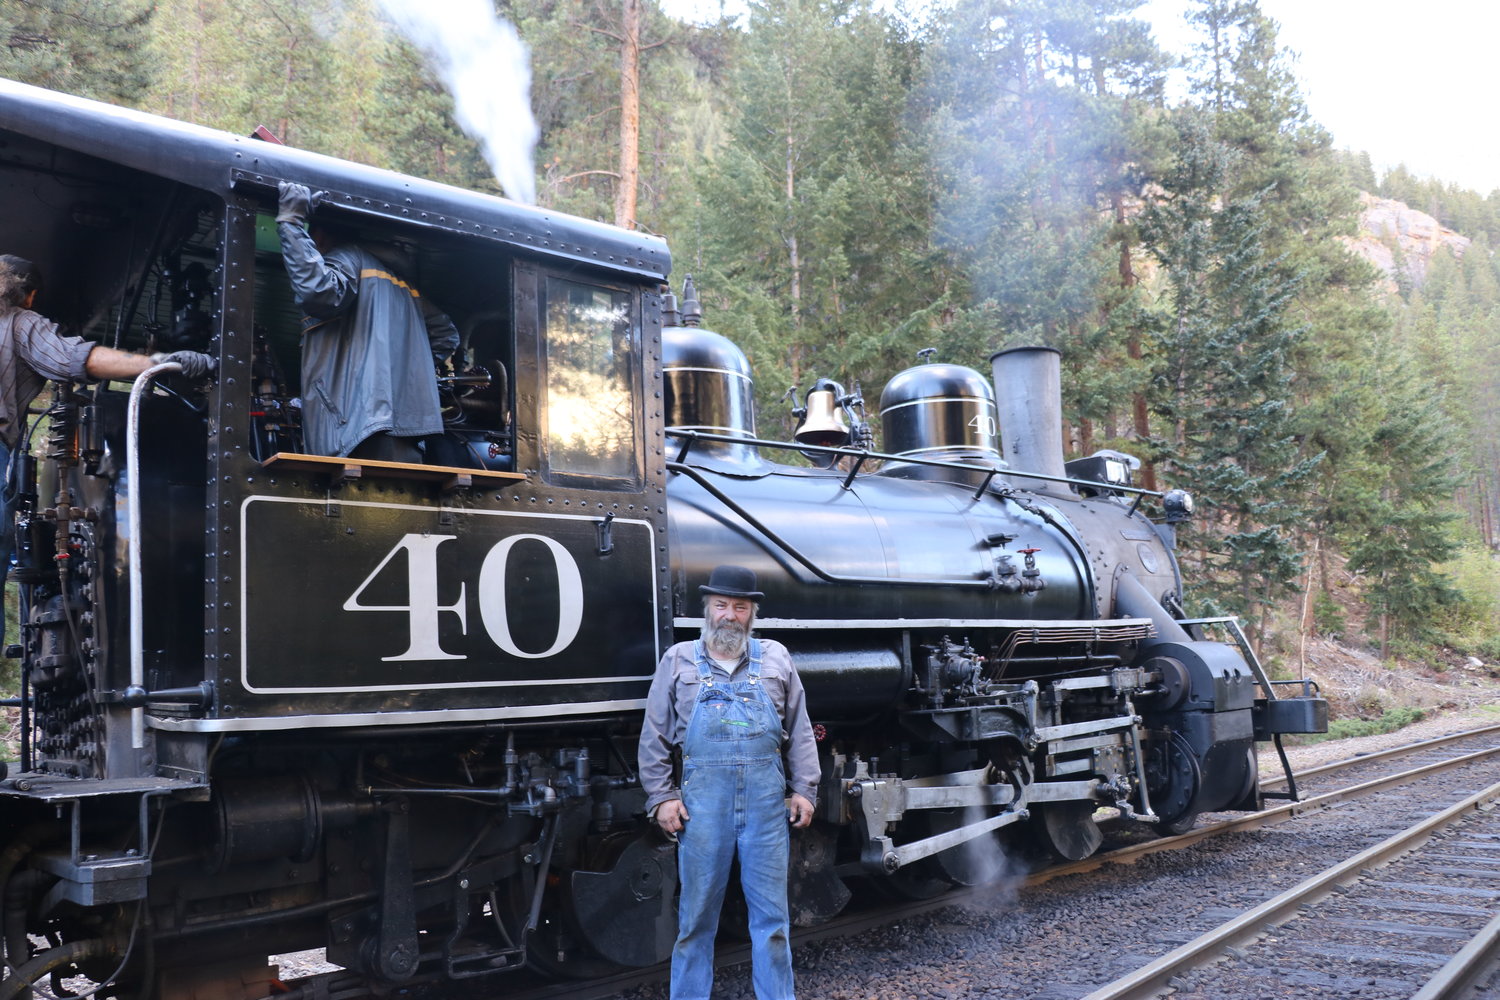 Mayor Sam McCloskey stands in front of one of the steam engines he works on.